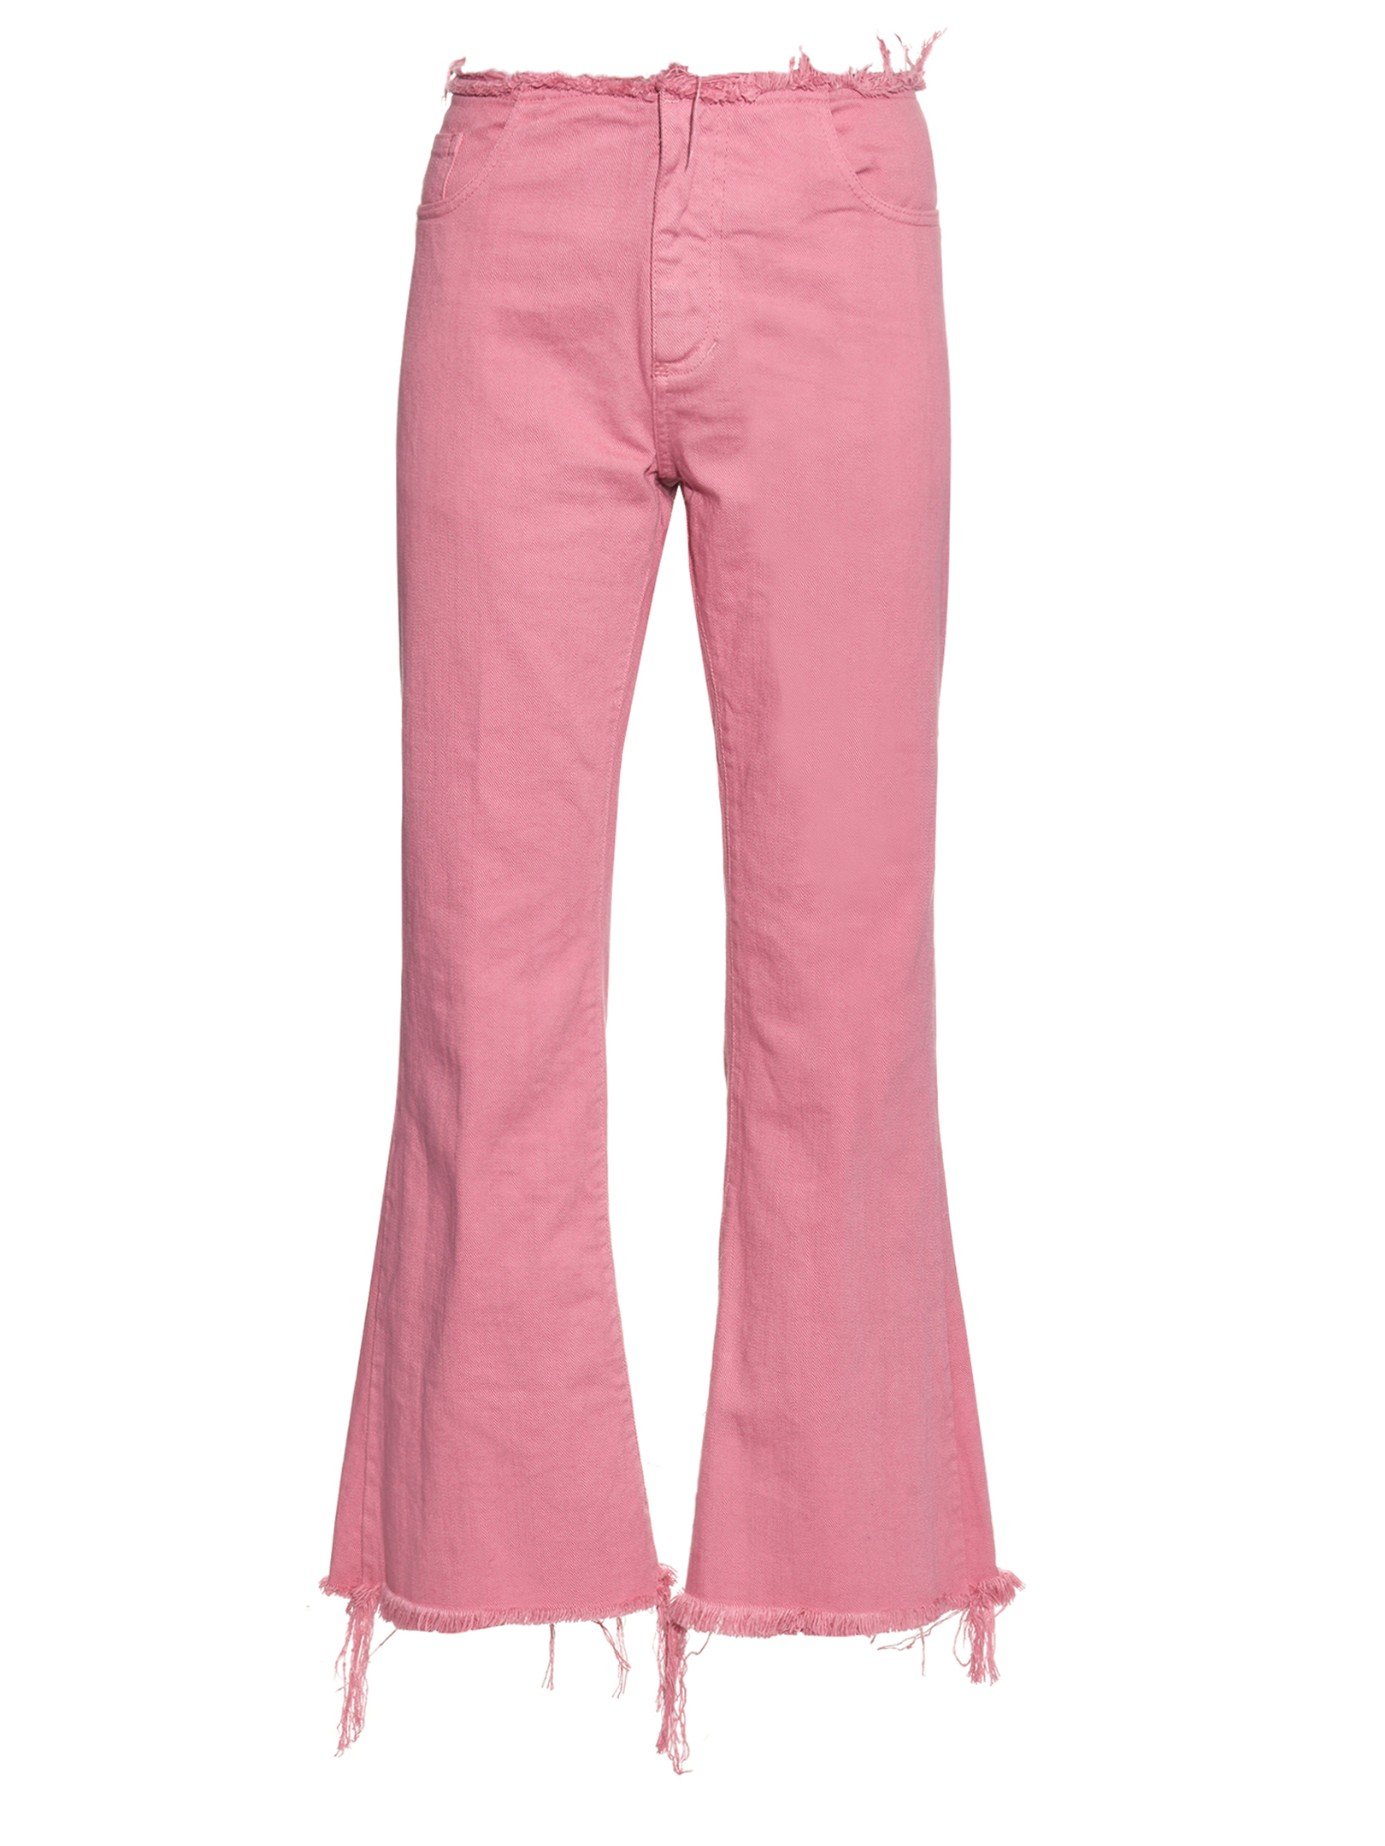 Lyst - Marques'almeida Capri Frayed-edge Flared Jeans in Pink